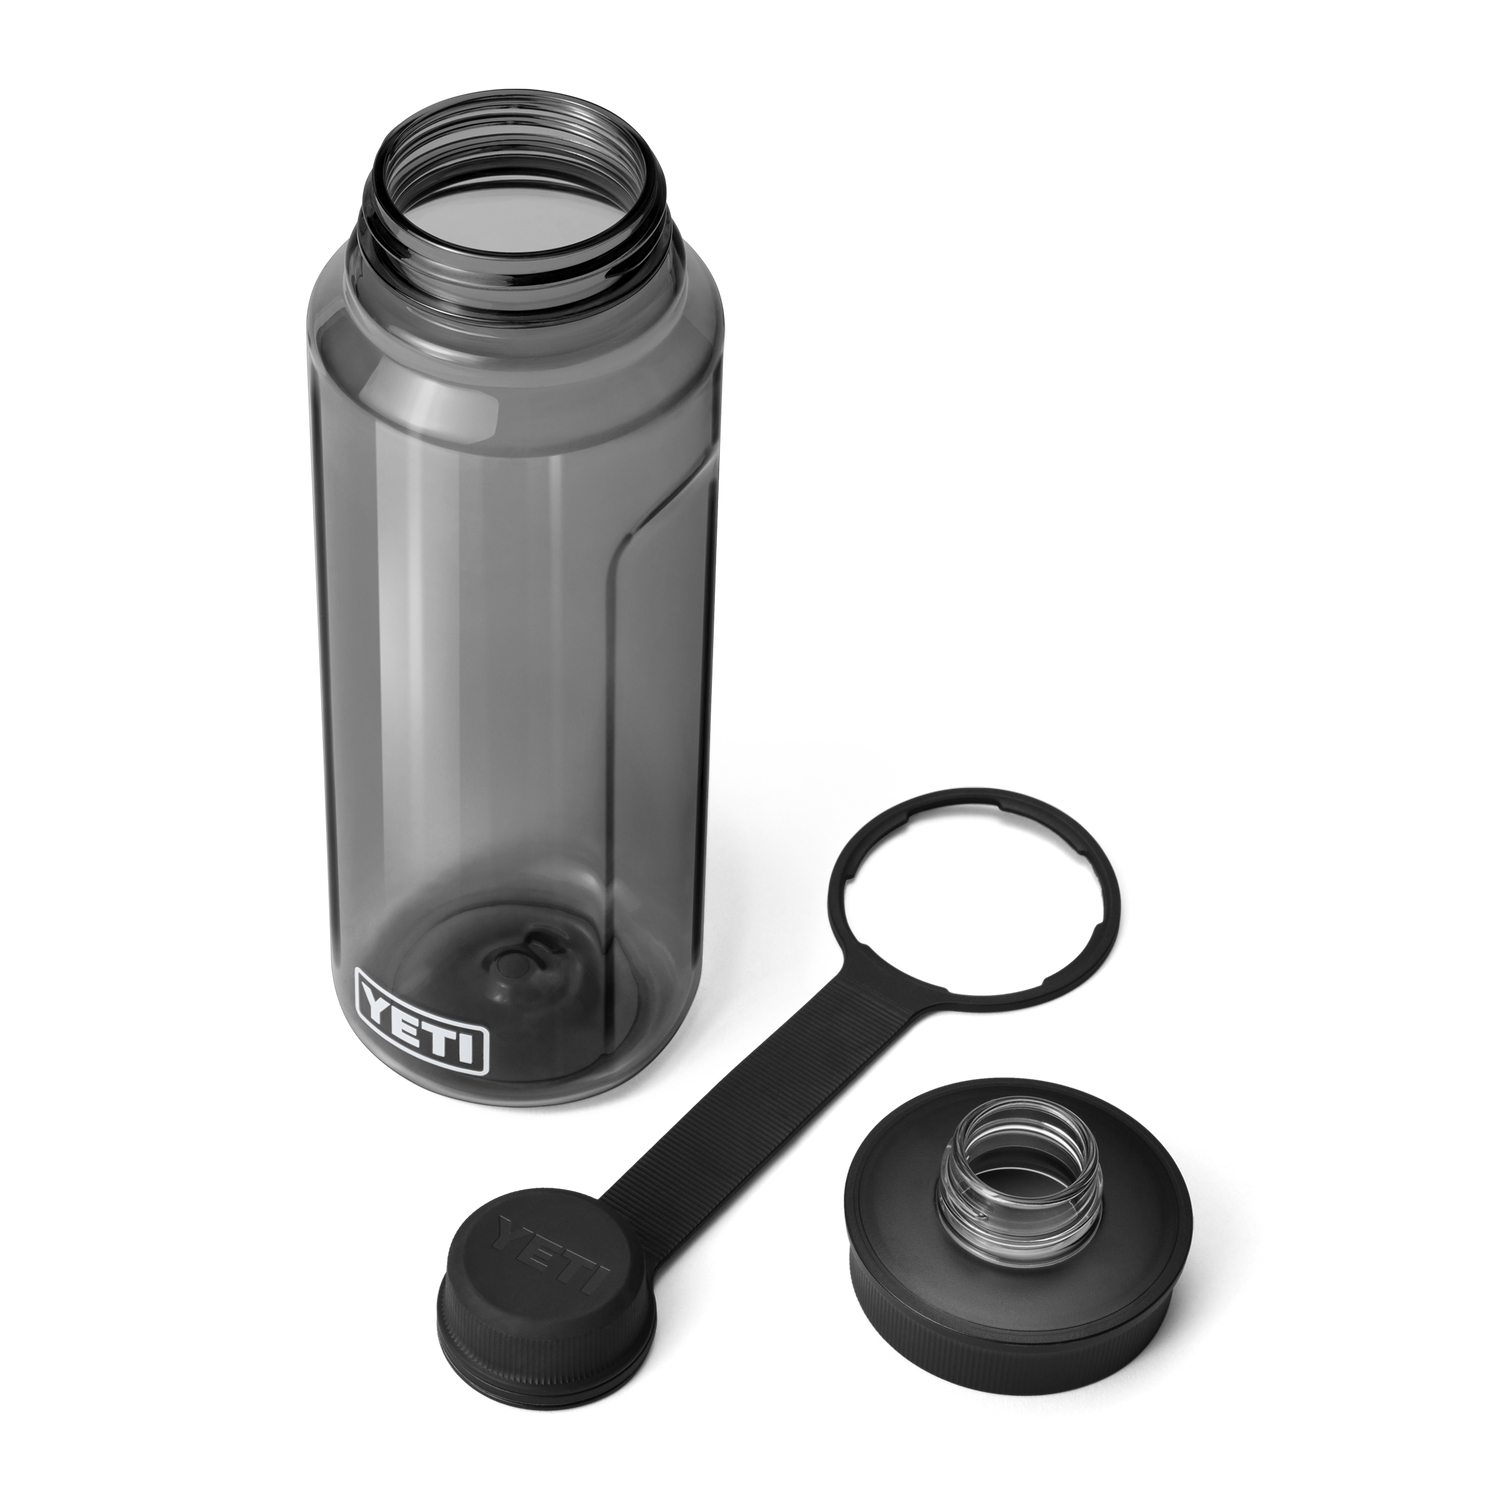 site_studio_Drinkware_Yonder_Tether_Accs_1L_Charcoal_3qtr_Chug_Lid_Off_0888_Primary_B_2400x2400.png